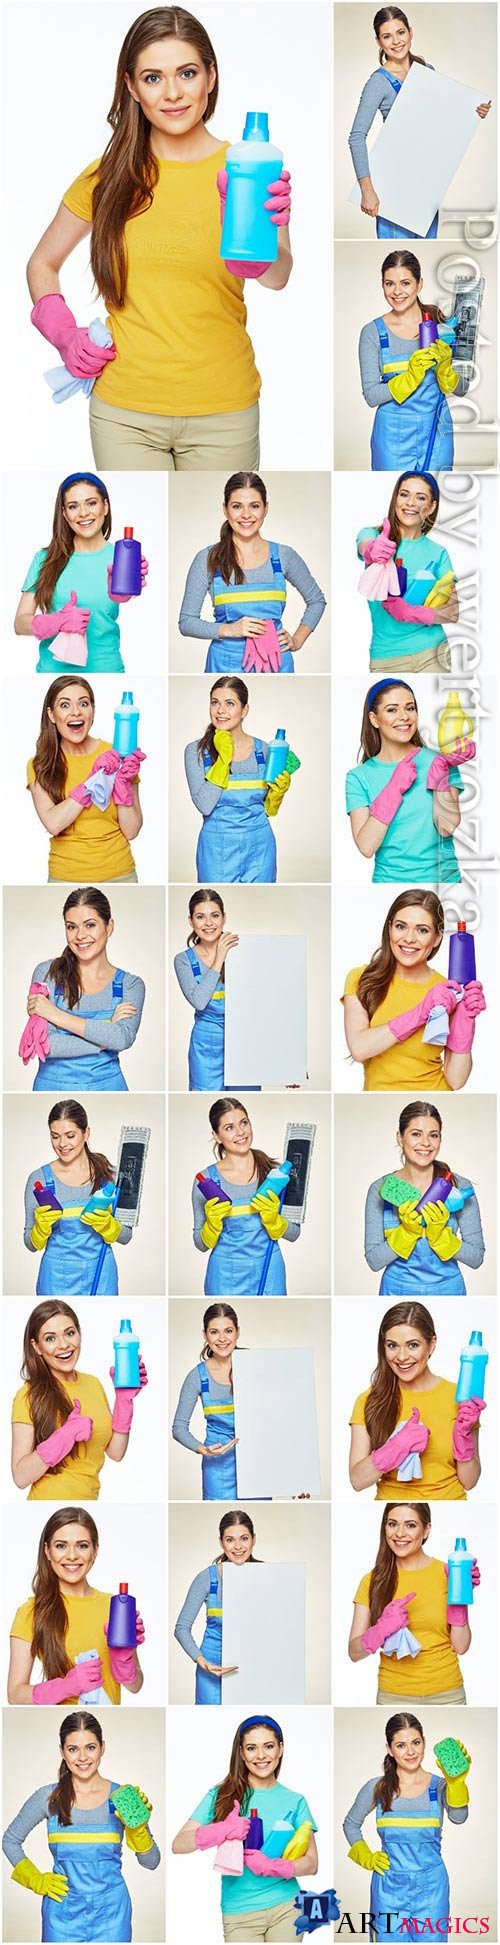 Cleaning service, girl with cleaning products stock photo